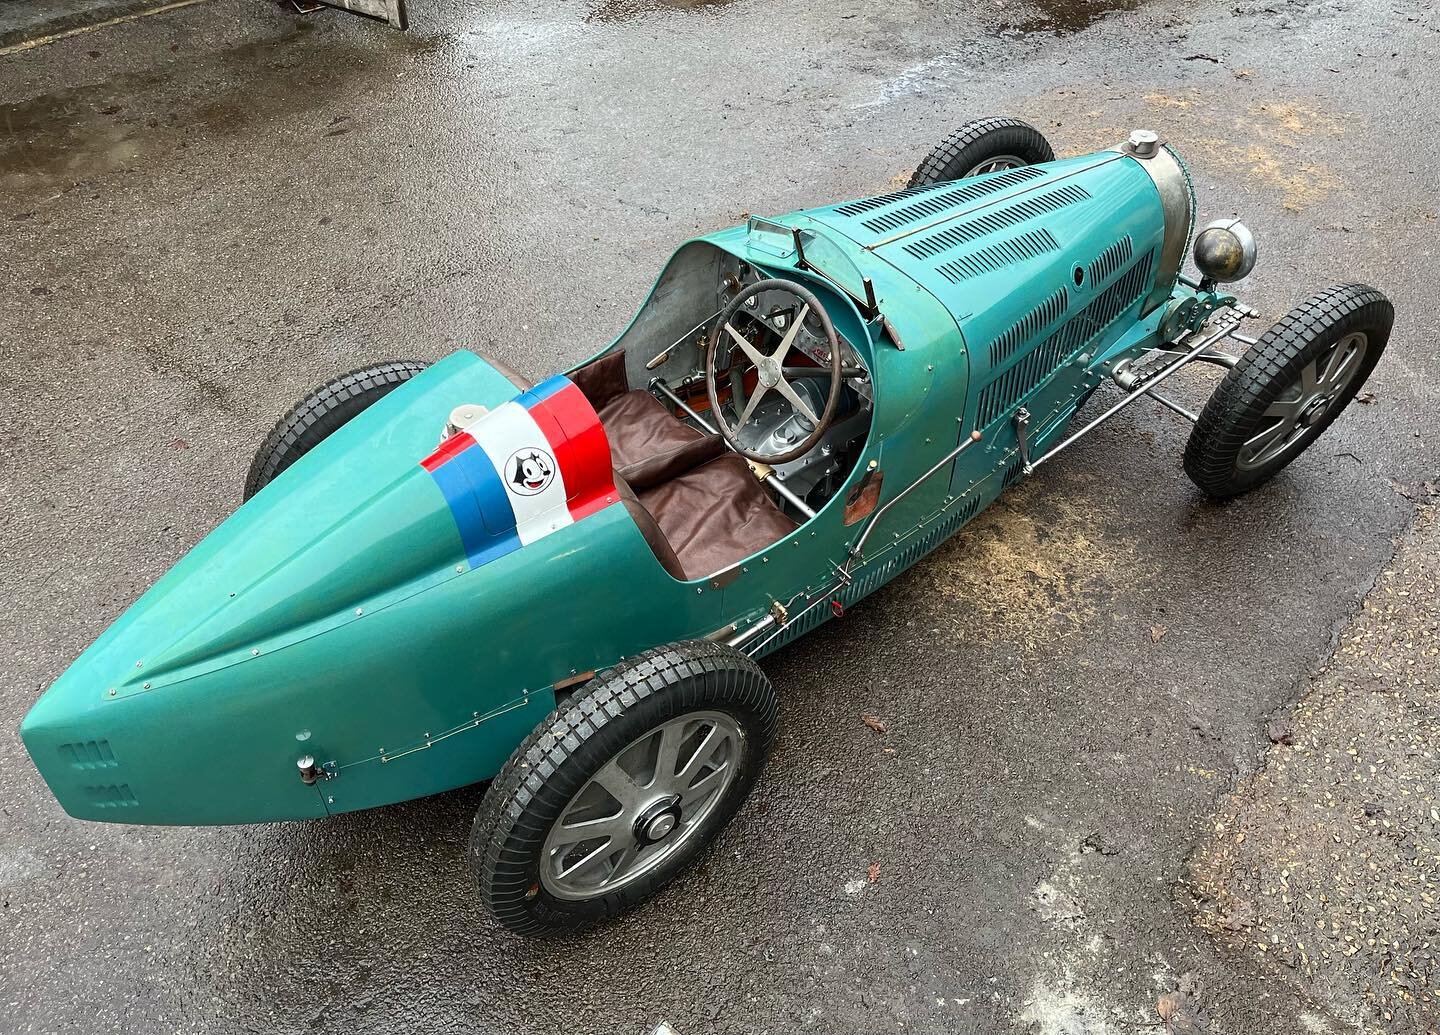 Bugatti type 35b for Christmas. Complete with lucky cat for much missed Simon. #diffey #bugatti #bugattitype35 #bugattit35 #bugattit35b